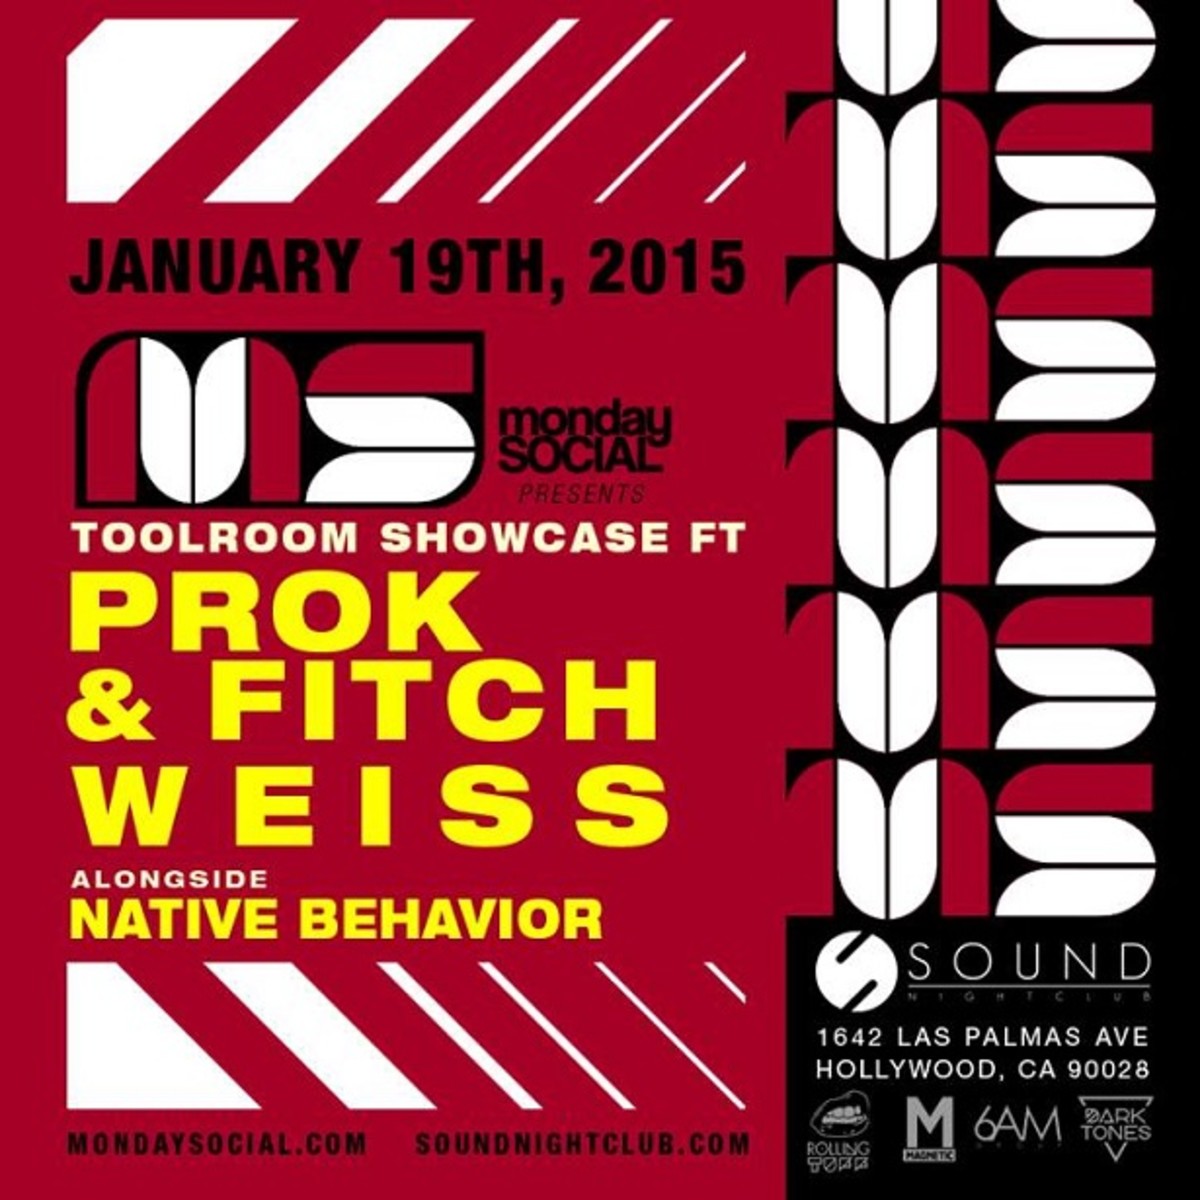 Toolroom Showcase at Monday Social Tonight Feat Prok & Fitch and Weiss! - 1/19/2015